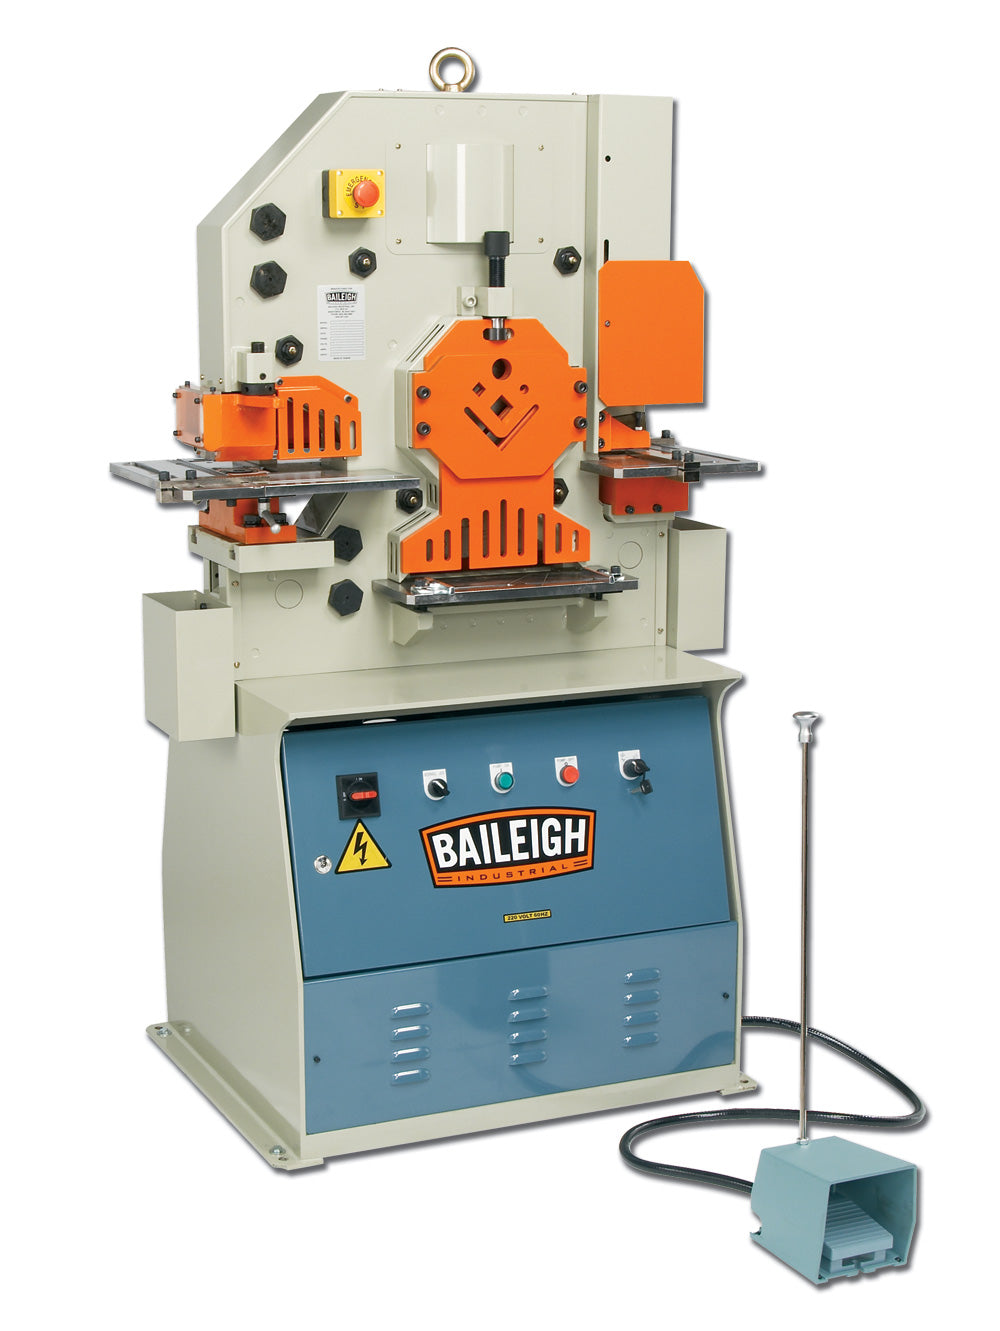 Baileigh SW-503 220V 3 Phase 50 Ton 5 Station Ironworker